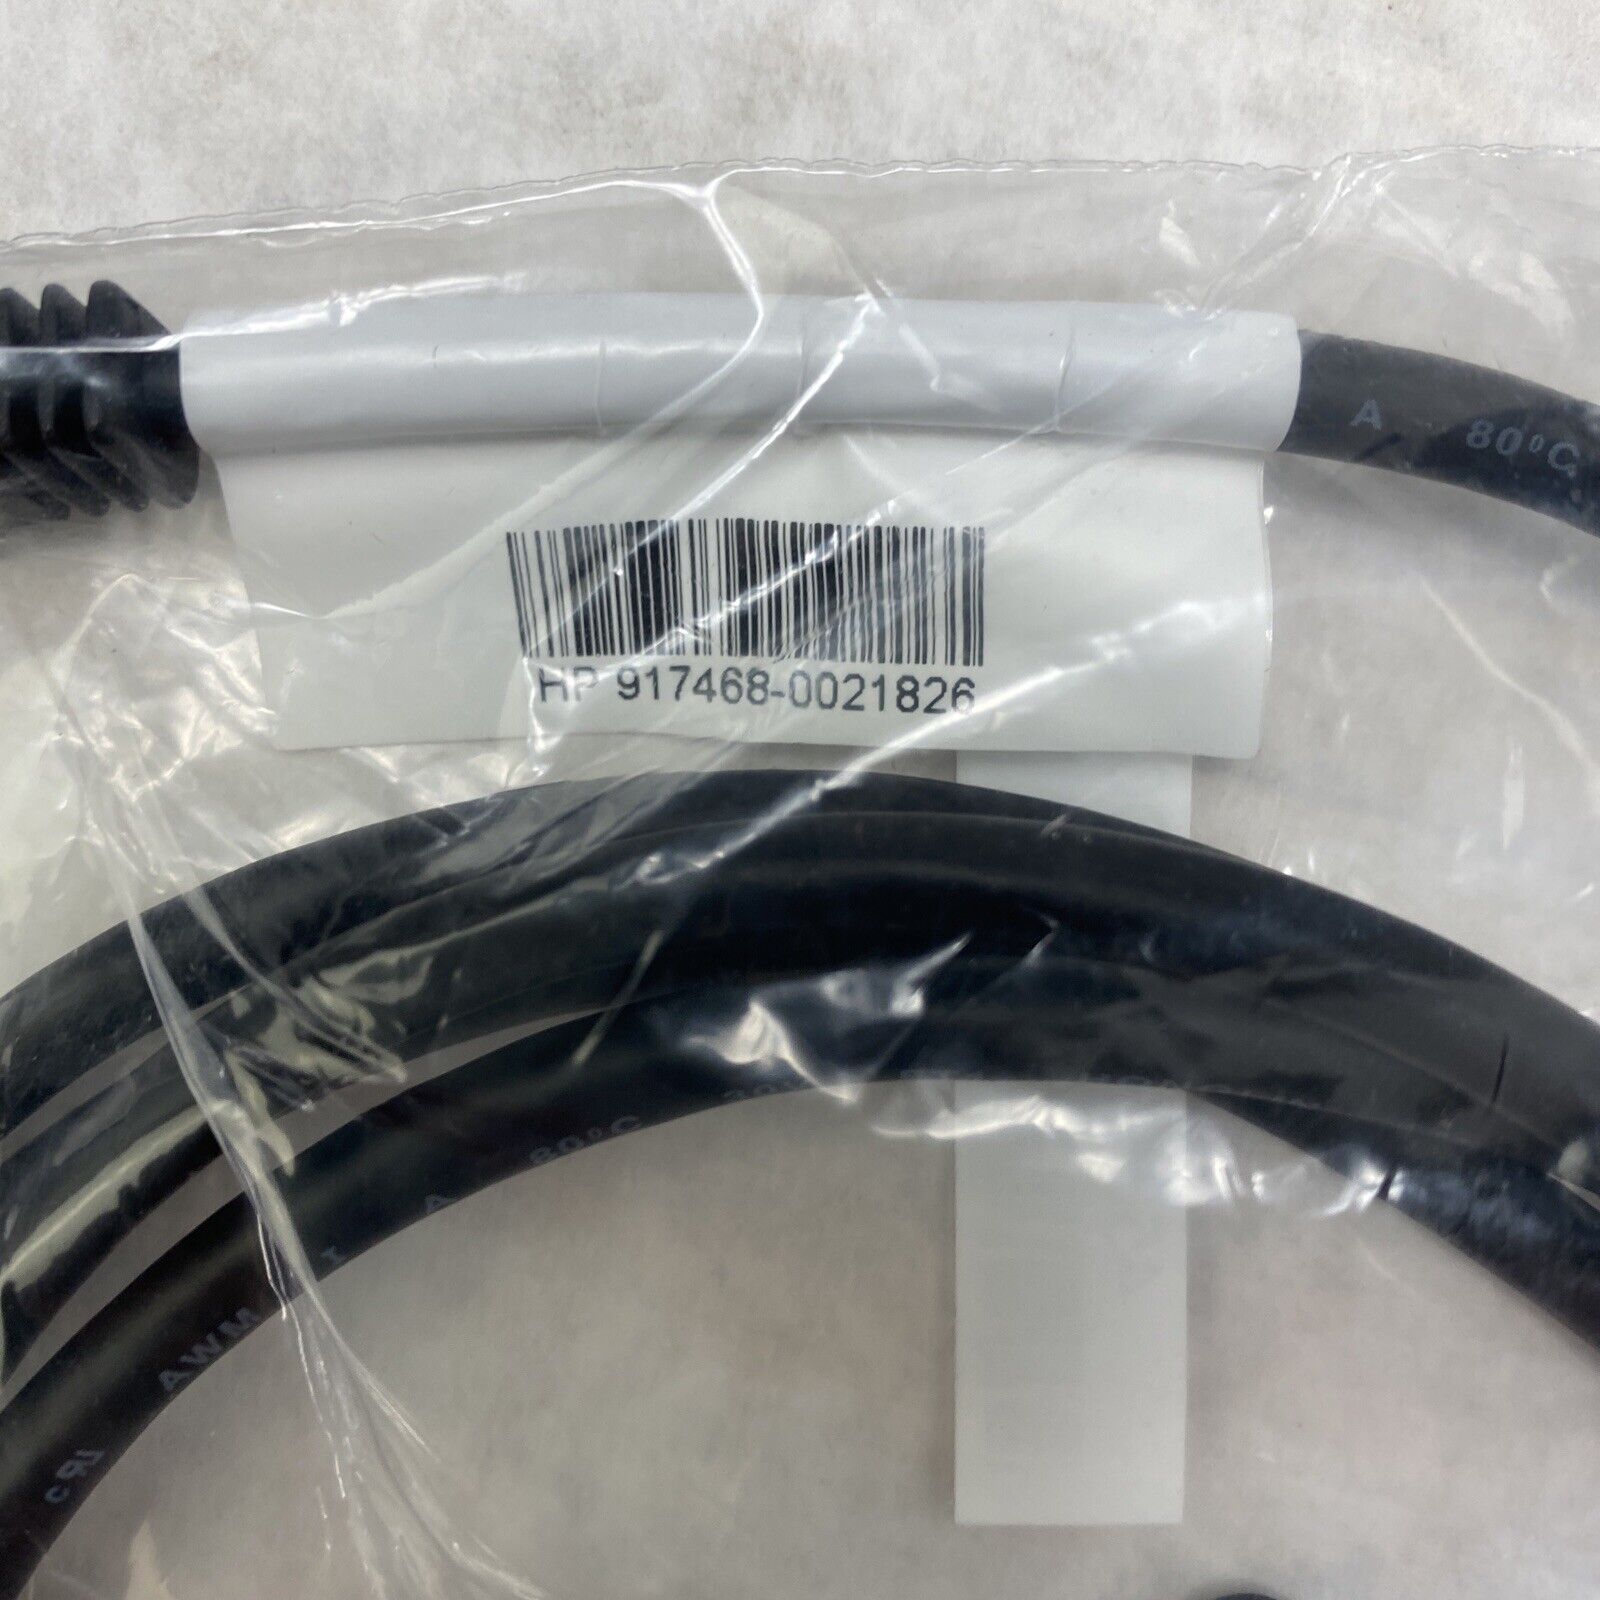 Lot(5) Genuine HP 917468 SS USB 3.0 Cable A-Male to B-Male 6ft Black HP 917468-0021905, 917468-0021826 - фотография #6